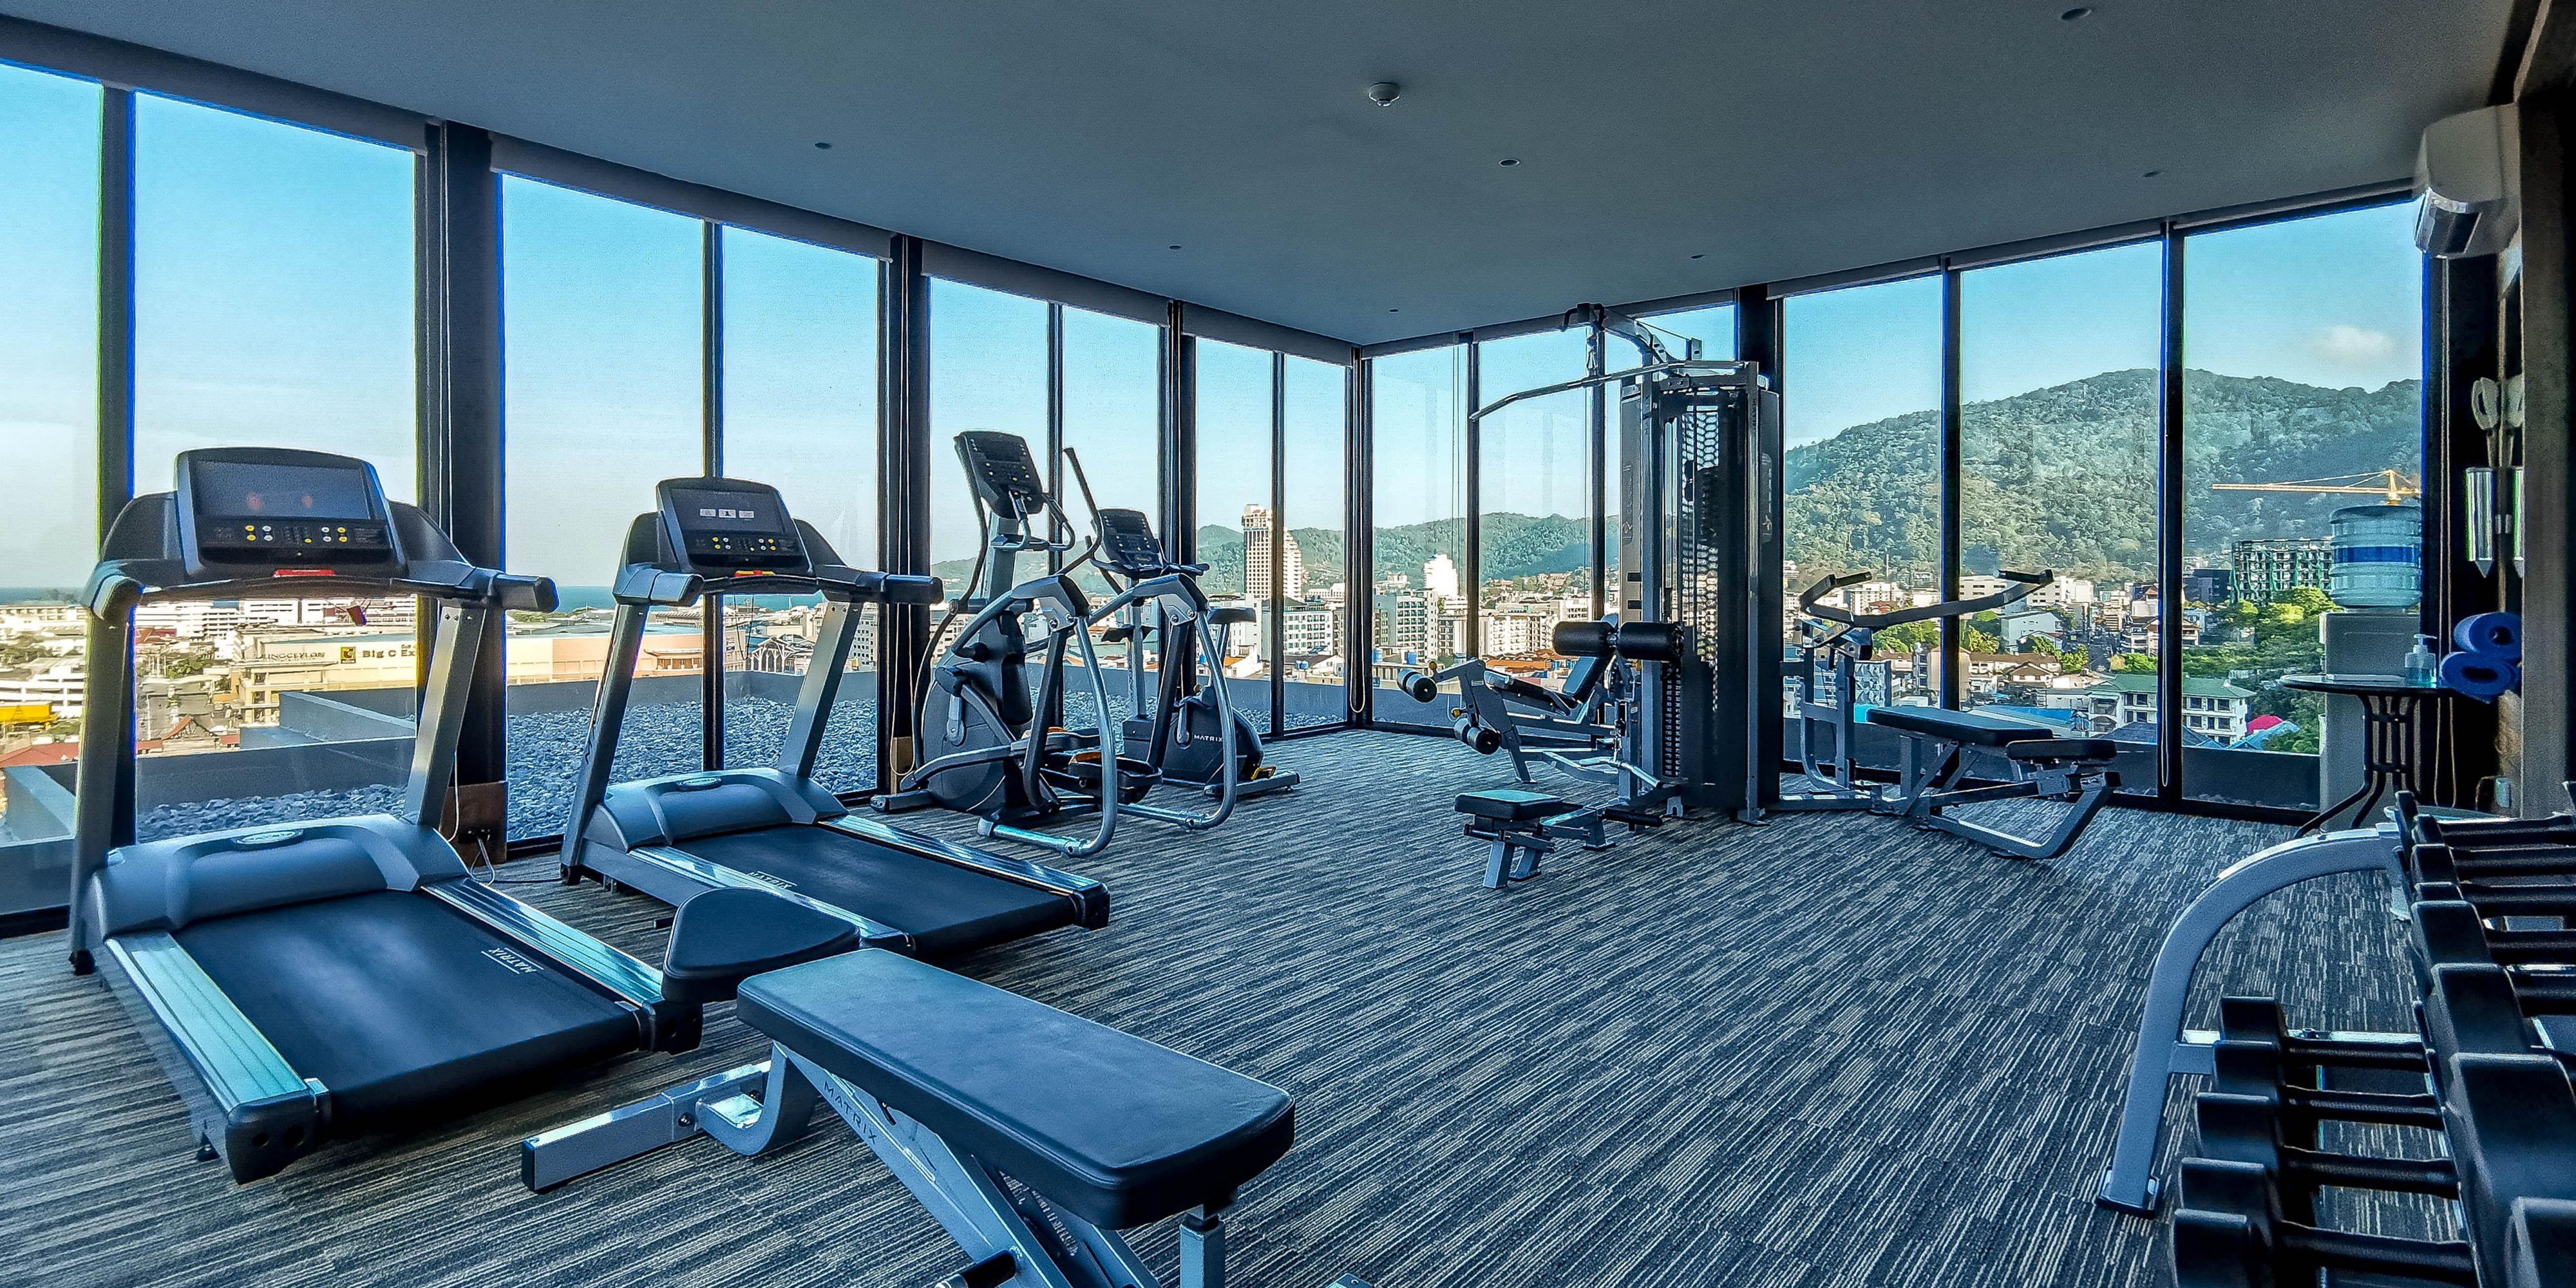 Enjoy stunning views of Patong while working out at our fitness centre. Open daily with all the equipment you desire, from treadmills to weights to yoga mats, this space is designed for you to focus on your health and wellbeing while you're staying with us. 